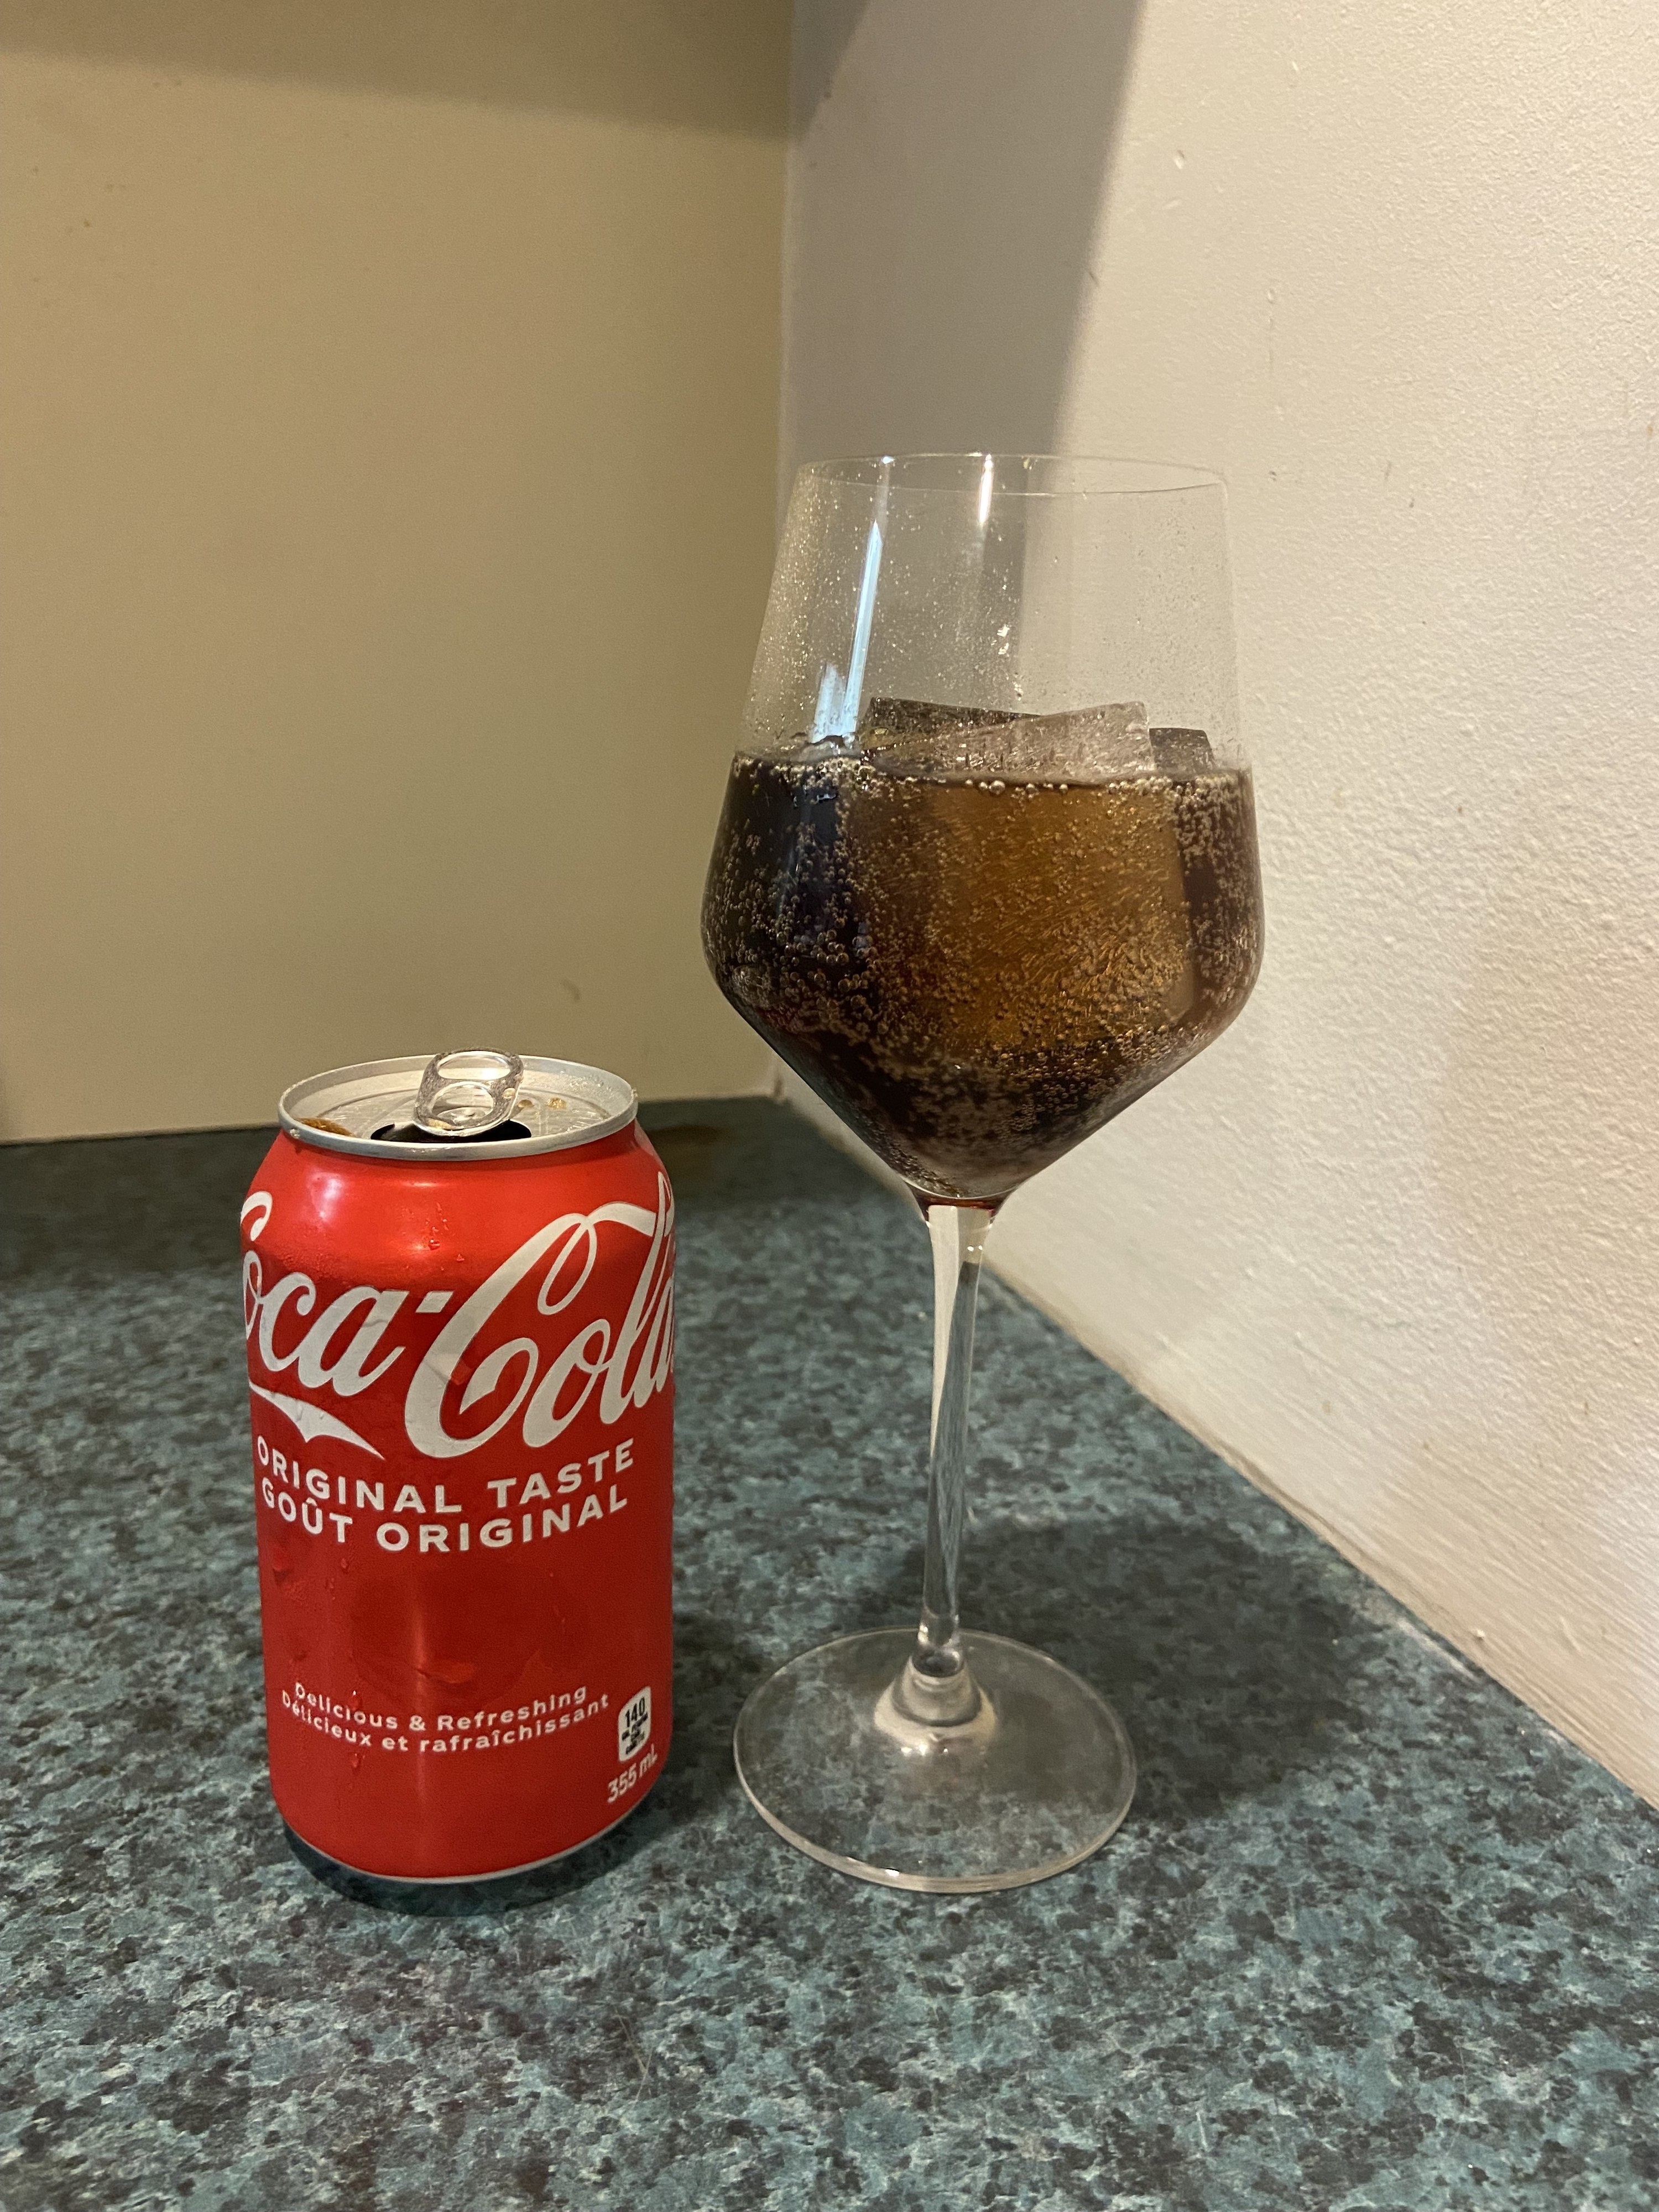 A glass of Coke with a can of Coca-Cola next to it